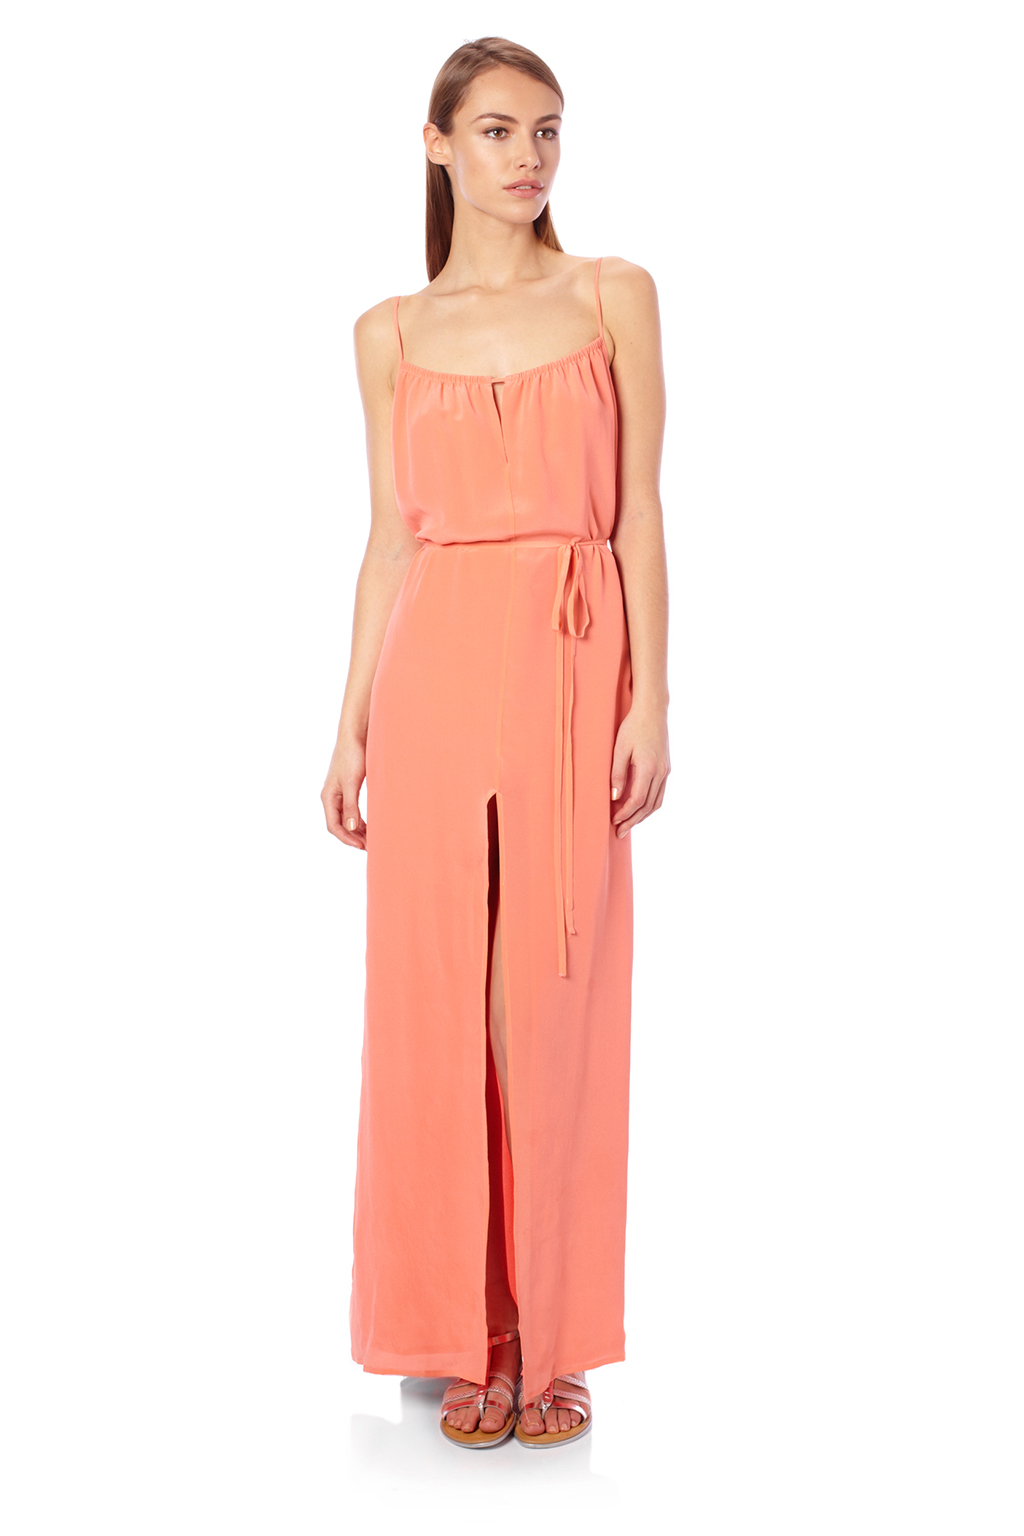 Lyst - French connection Chelsea Silk Maxi Dress in Pink